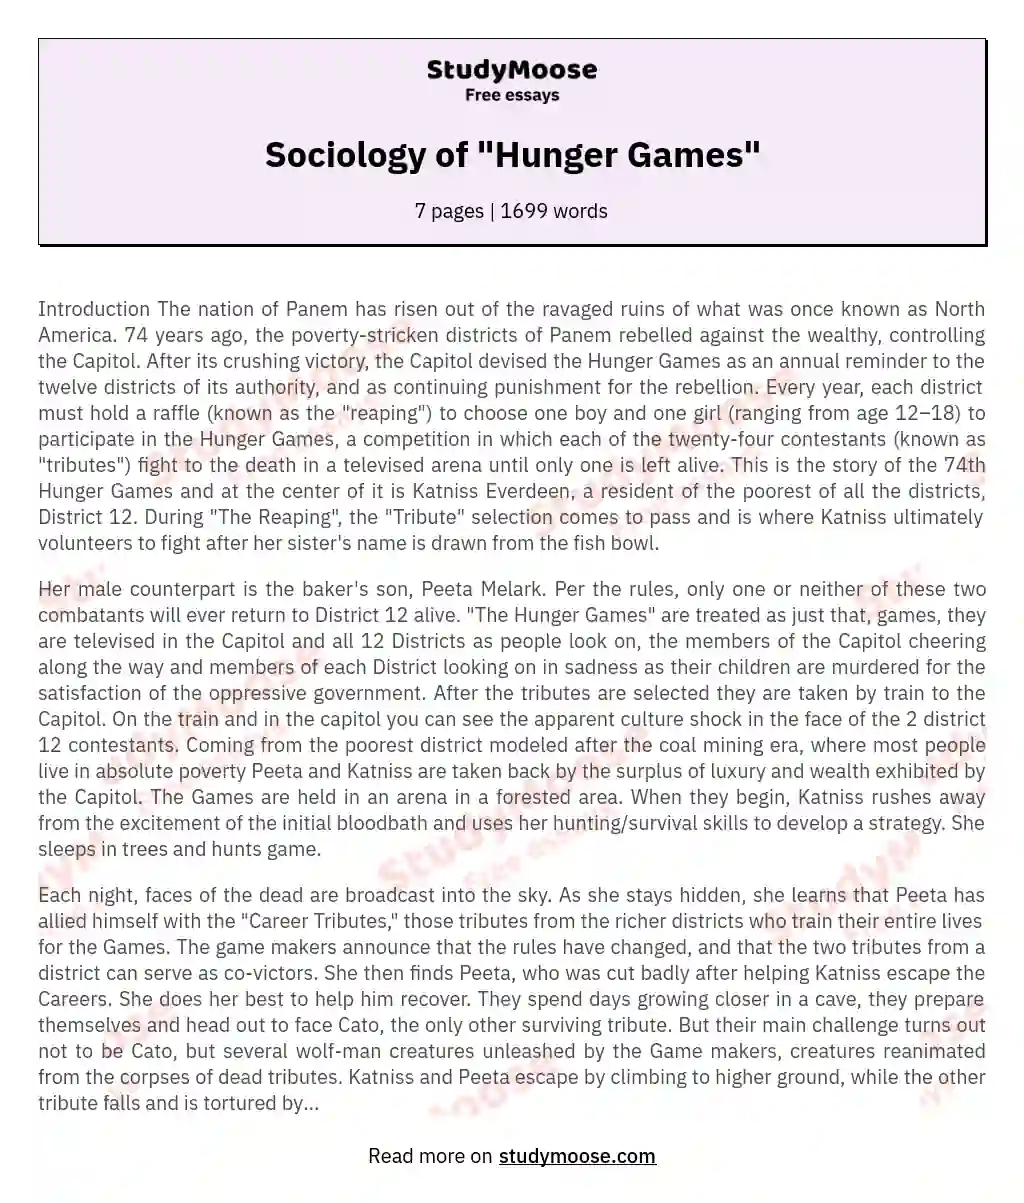 Sociology of "Hunger Games"